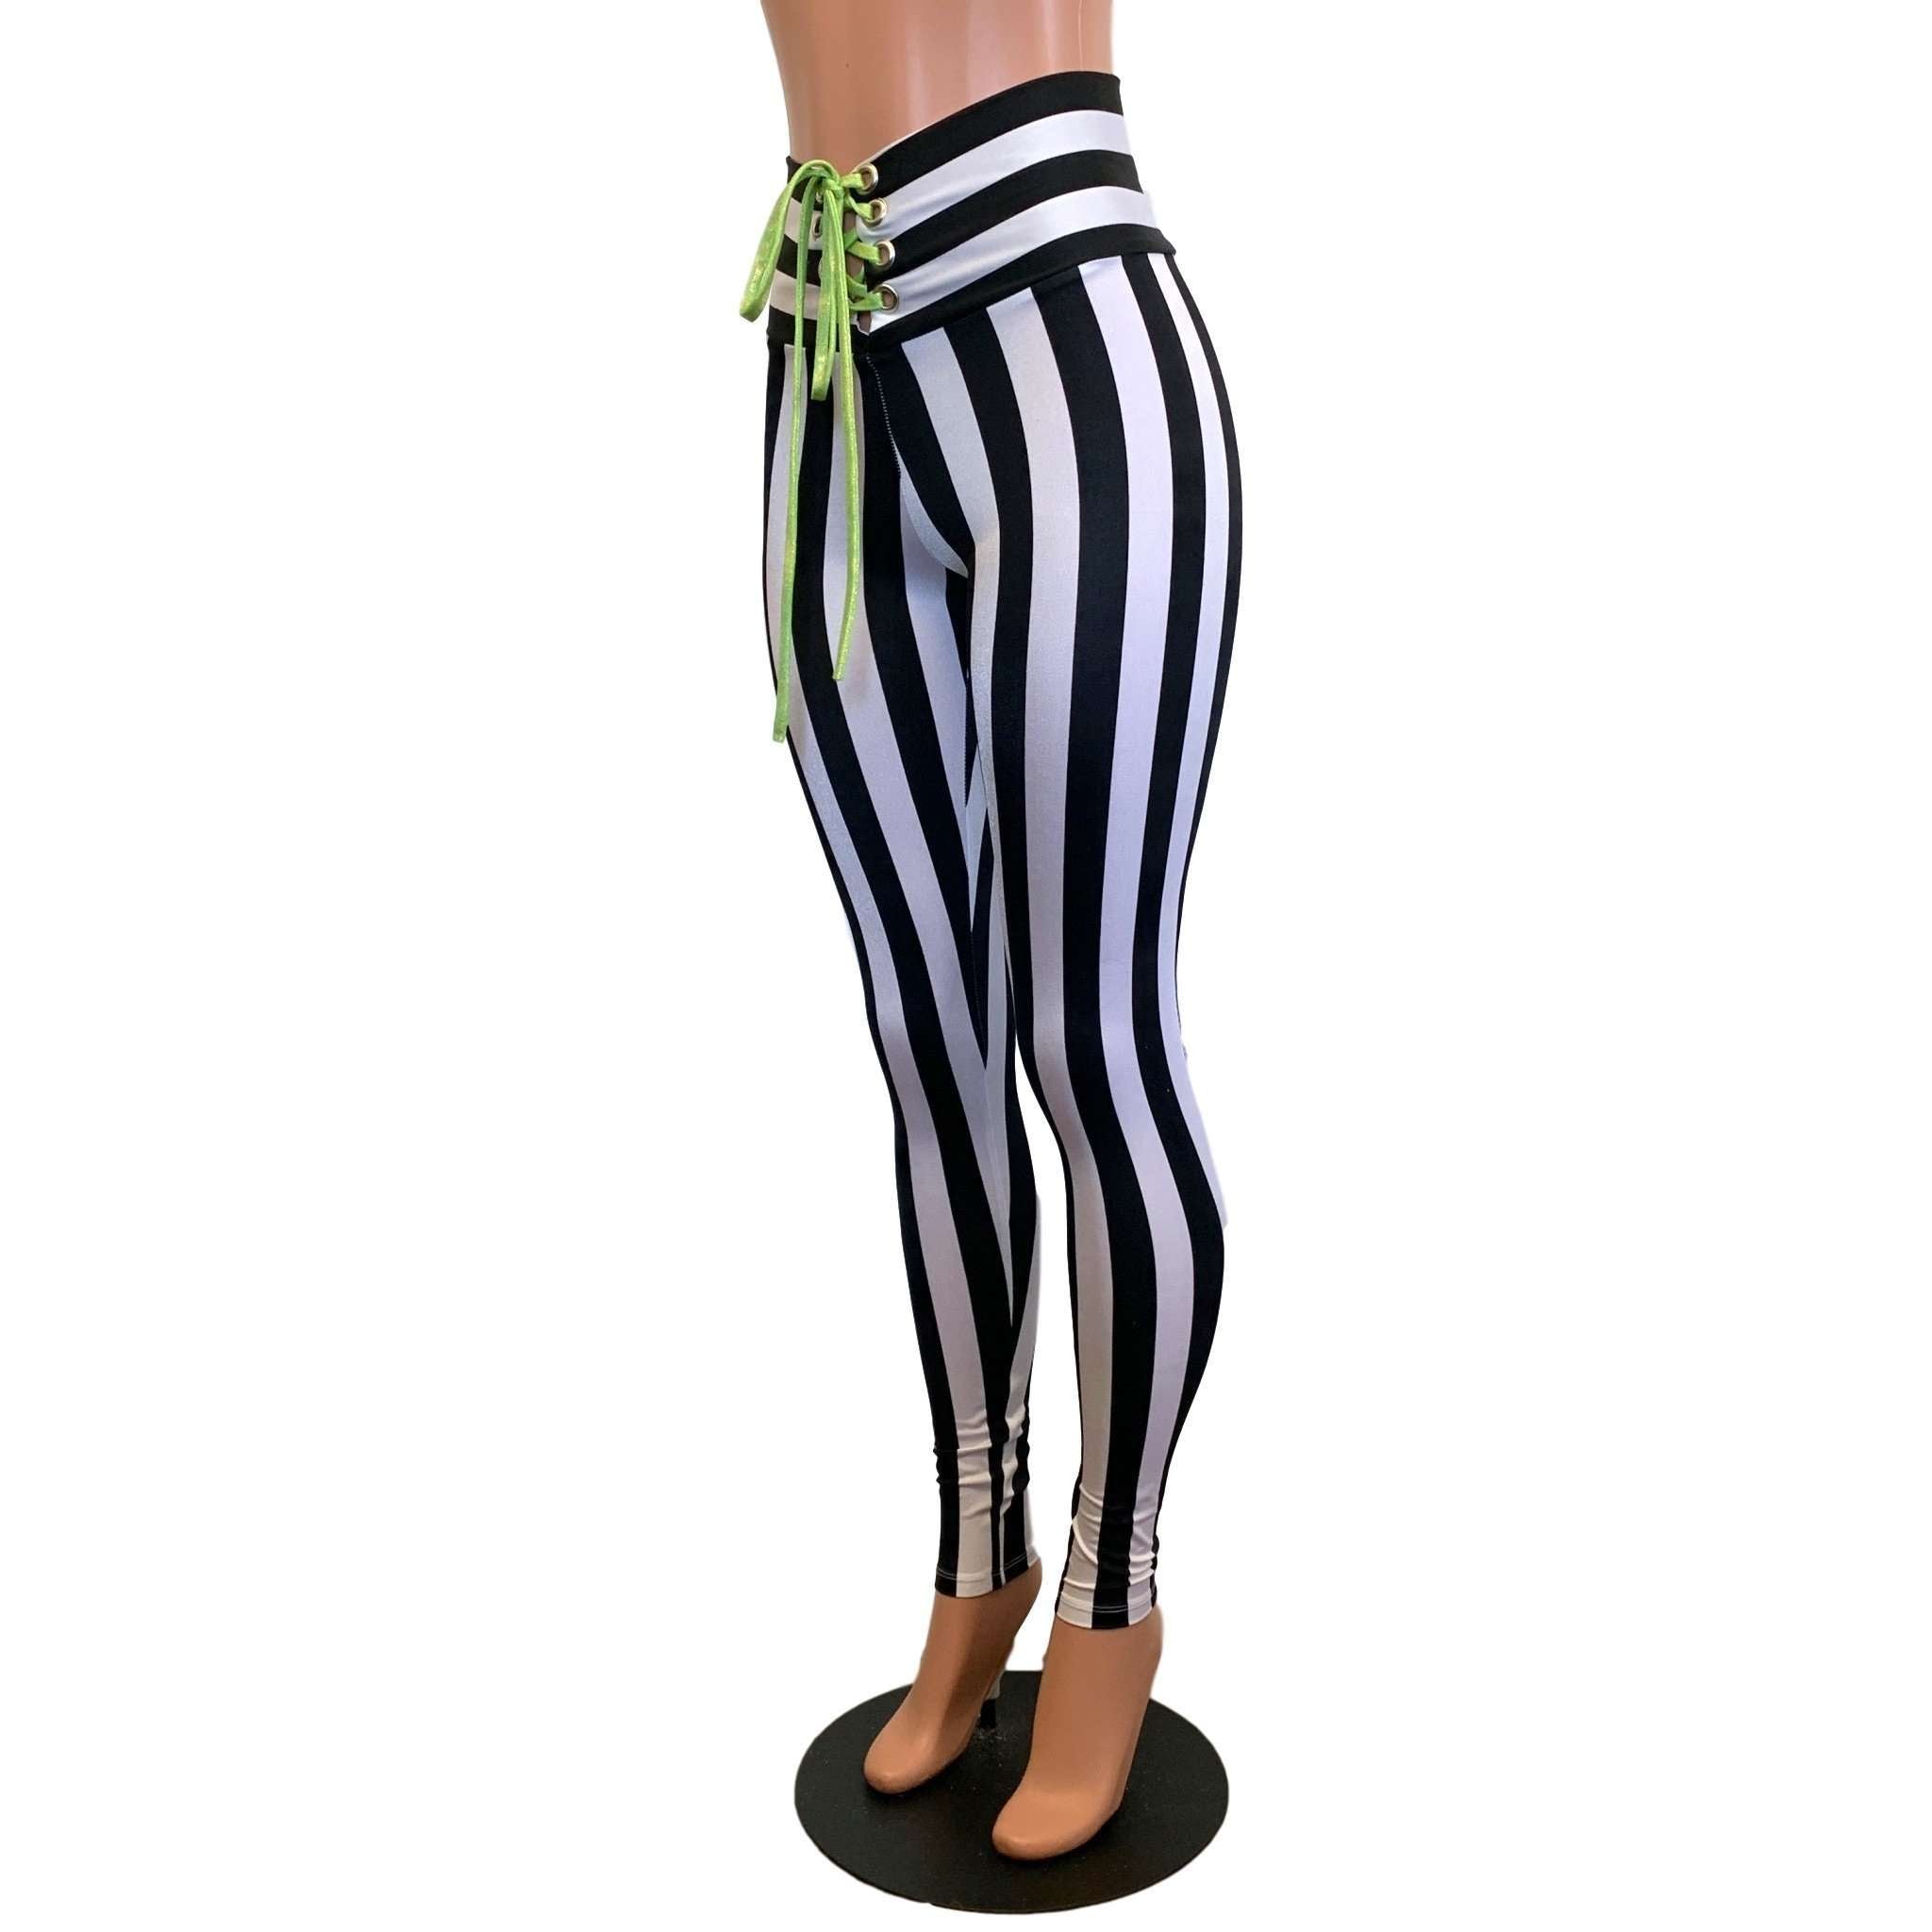 Buy Black and White Striped Leggings, Gothic Striped Leggings, High Waist Striped  Leggings, Halloween Leggings, Striped Leggings, Yoga Leggings Online in  India - Etsy